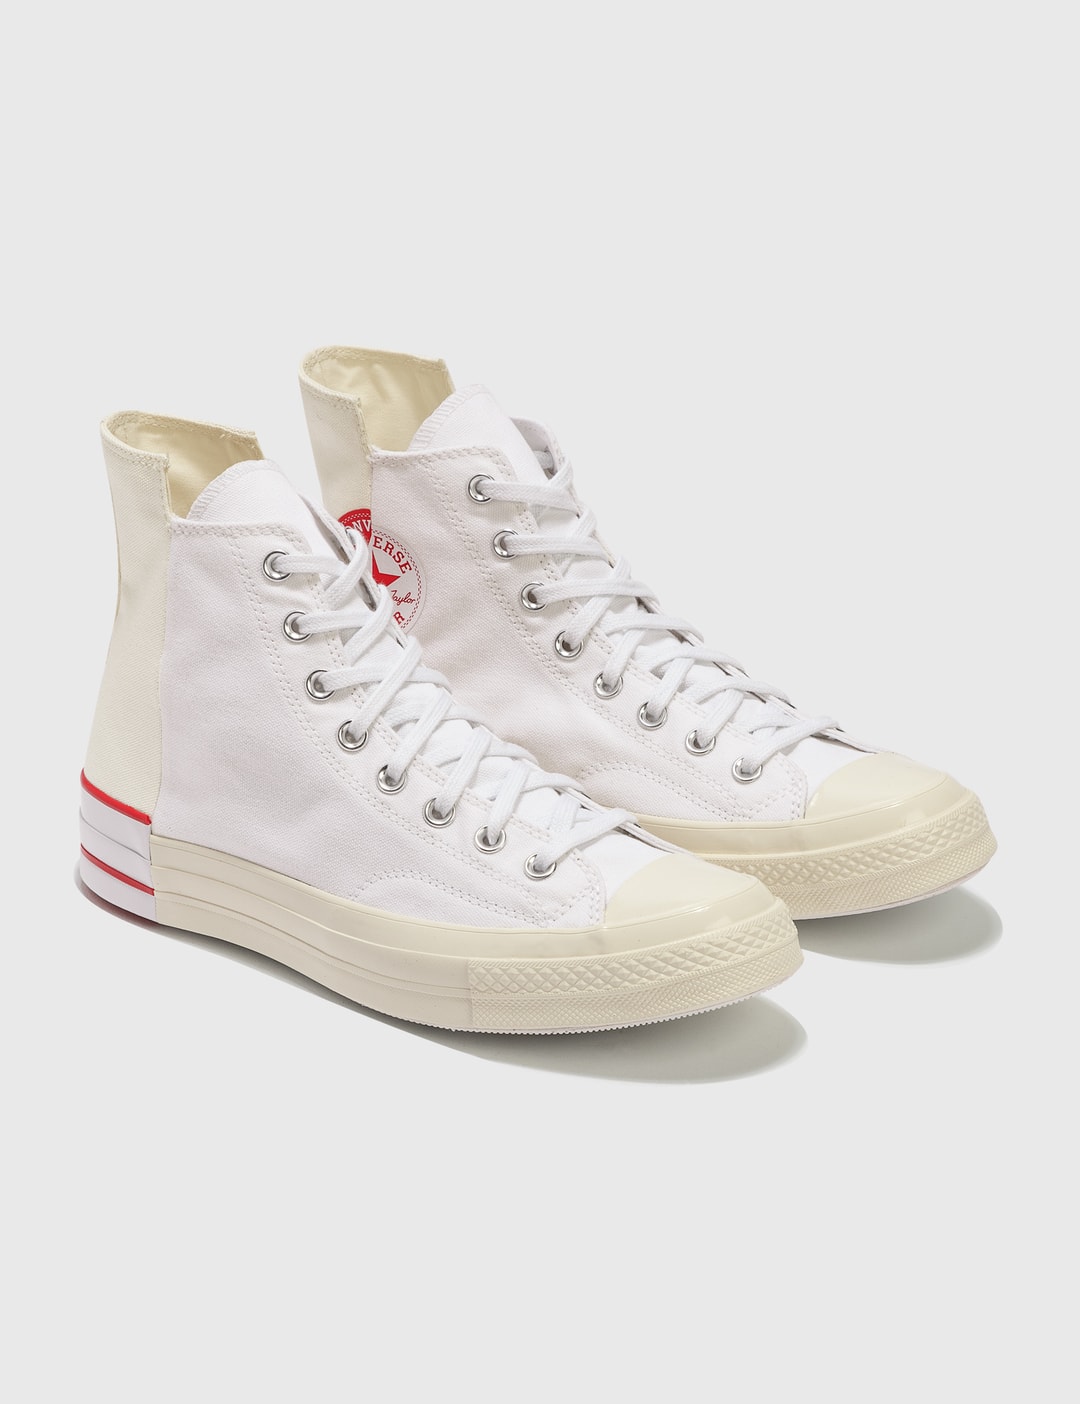 Converse - Chuck 70 | HBX - Globally Curated Fashion and Lifestyle by ...